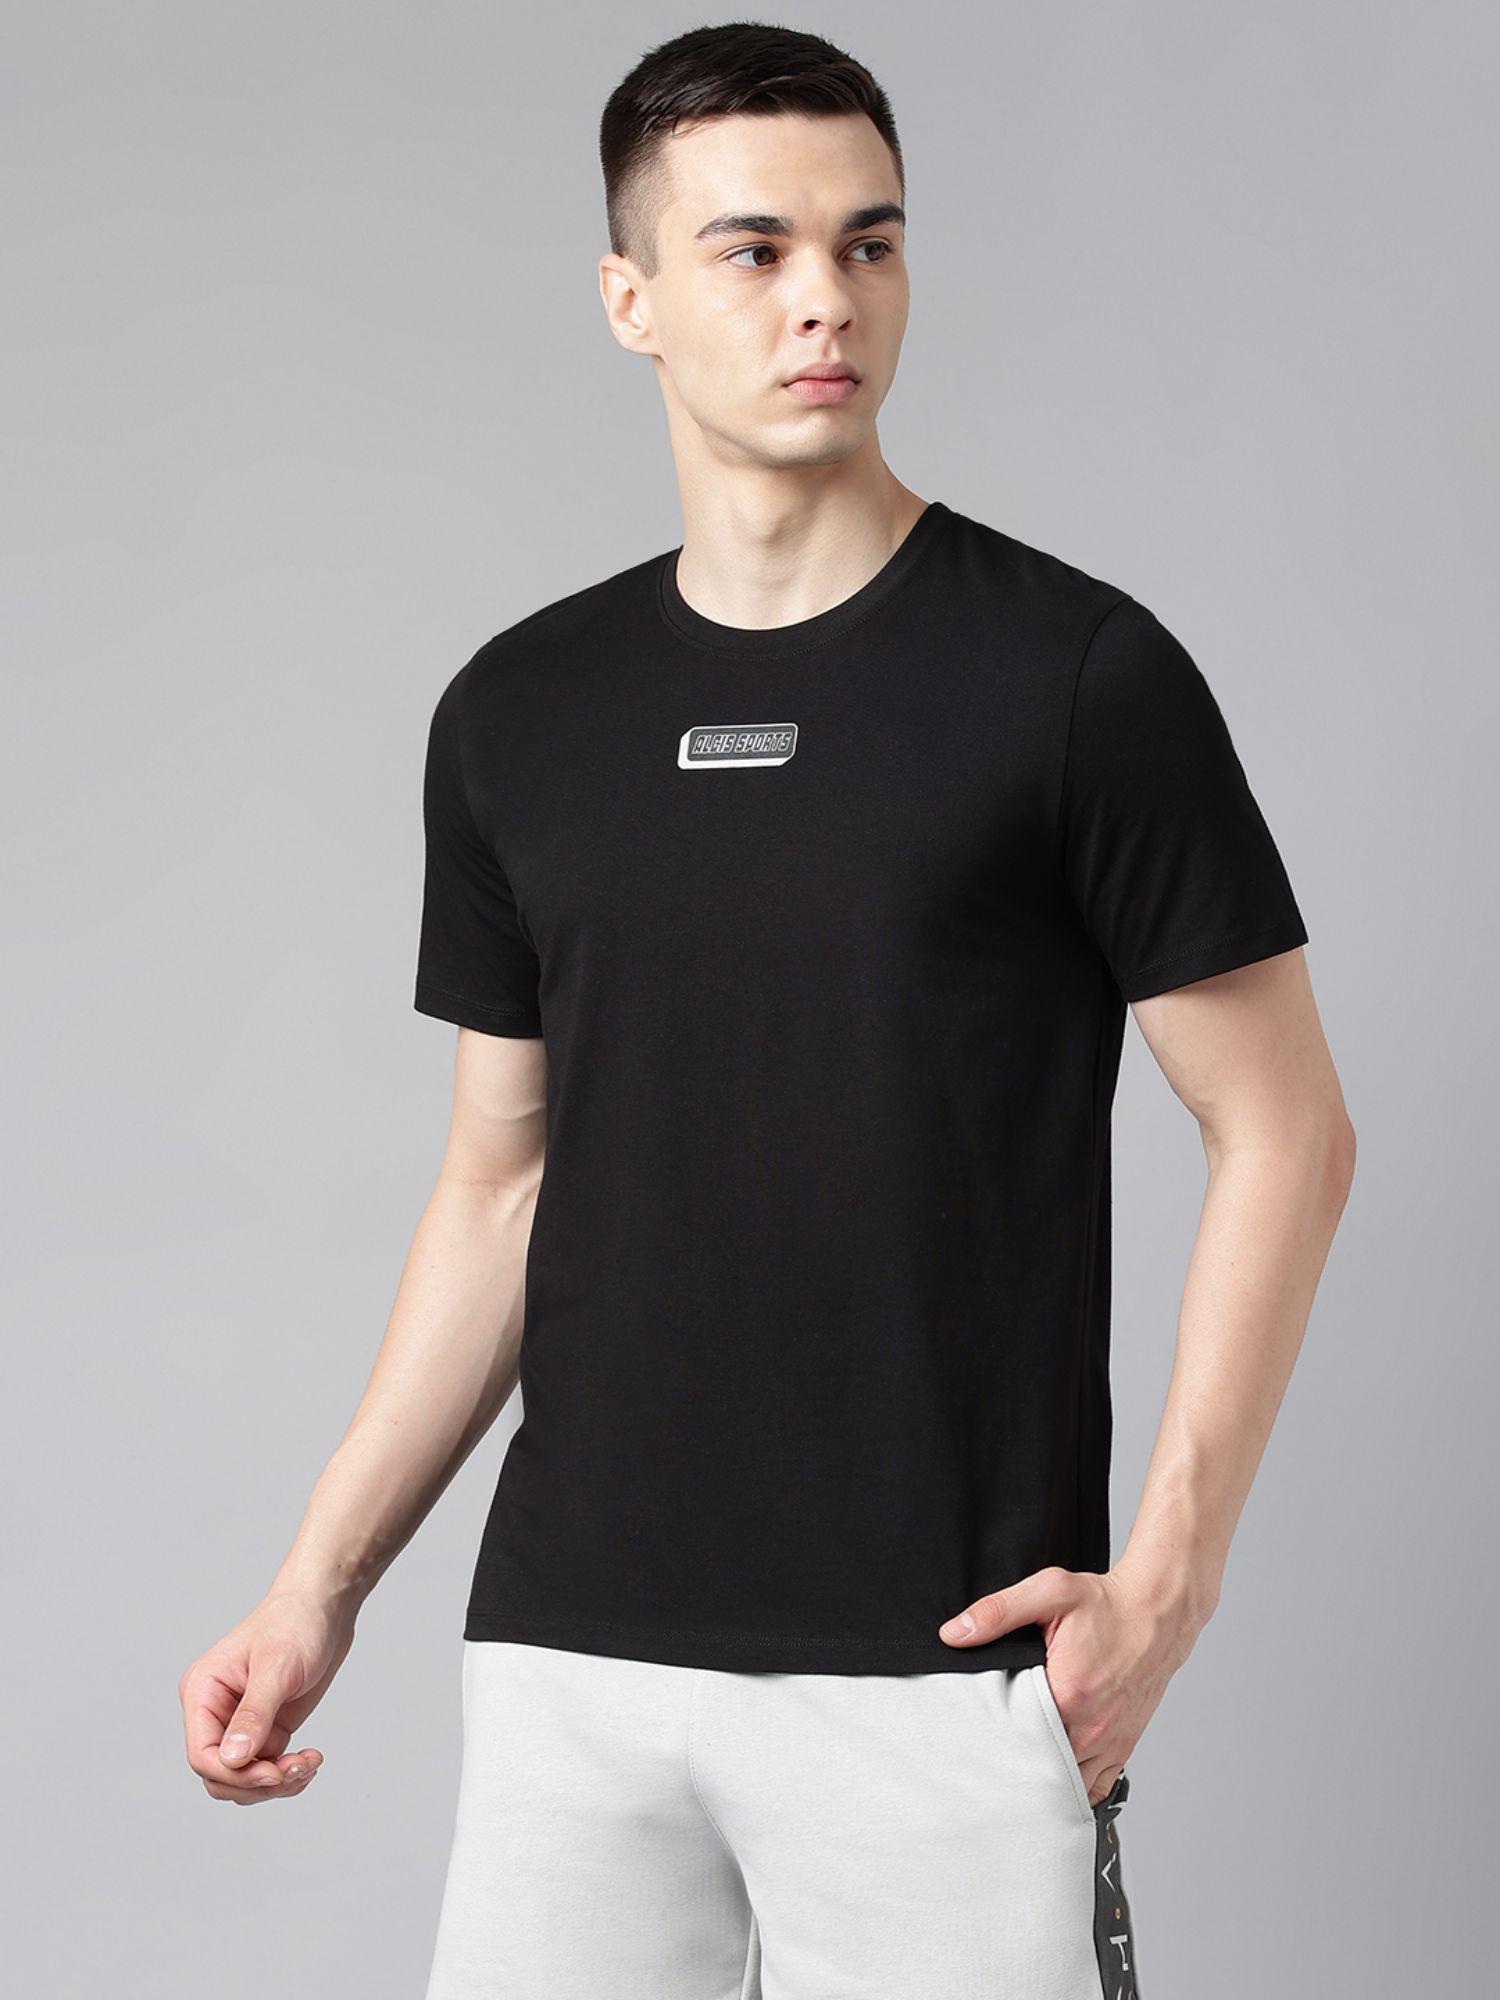 mens-printed-black-soft-touch-regular-fit-athleisure-t-shirt